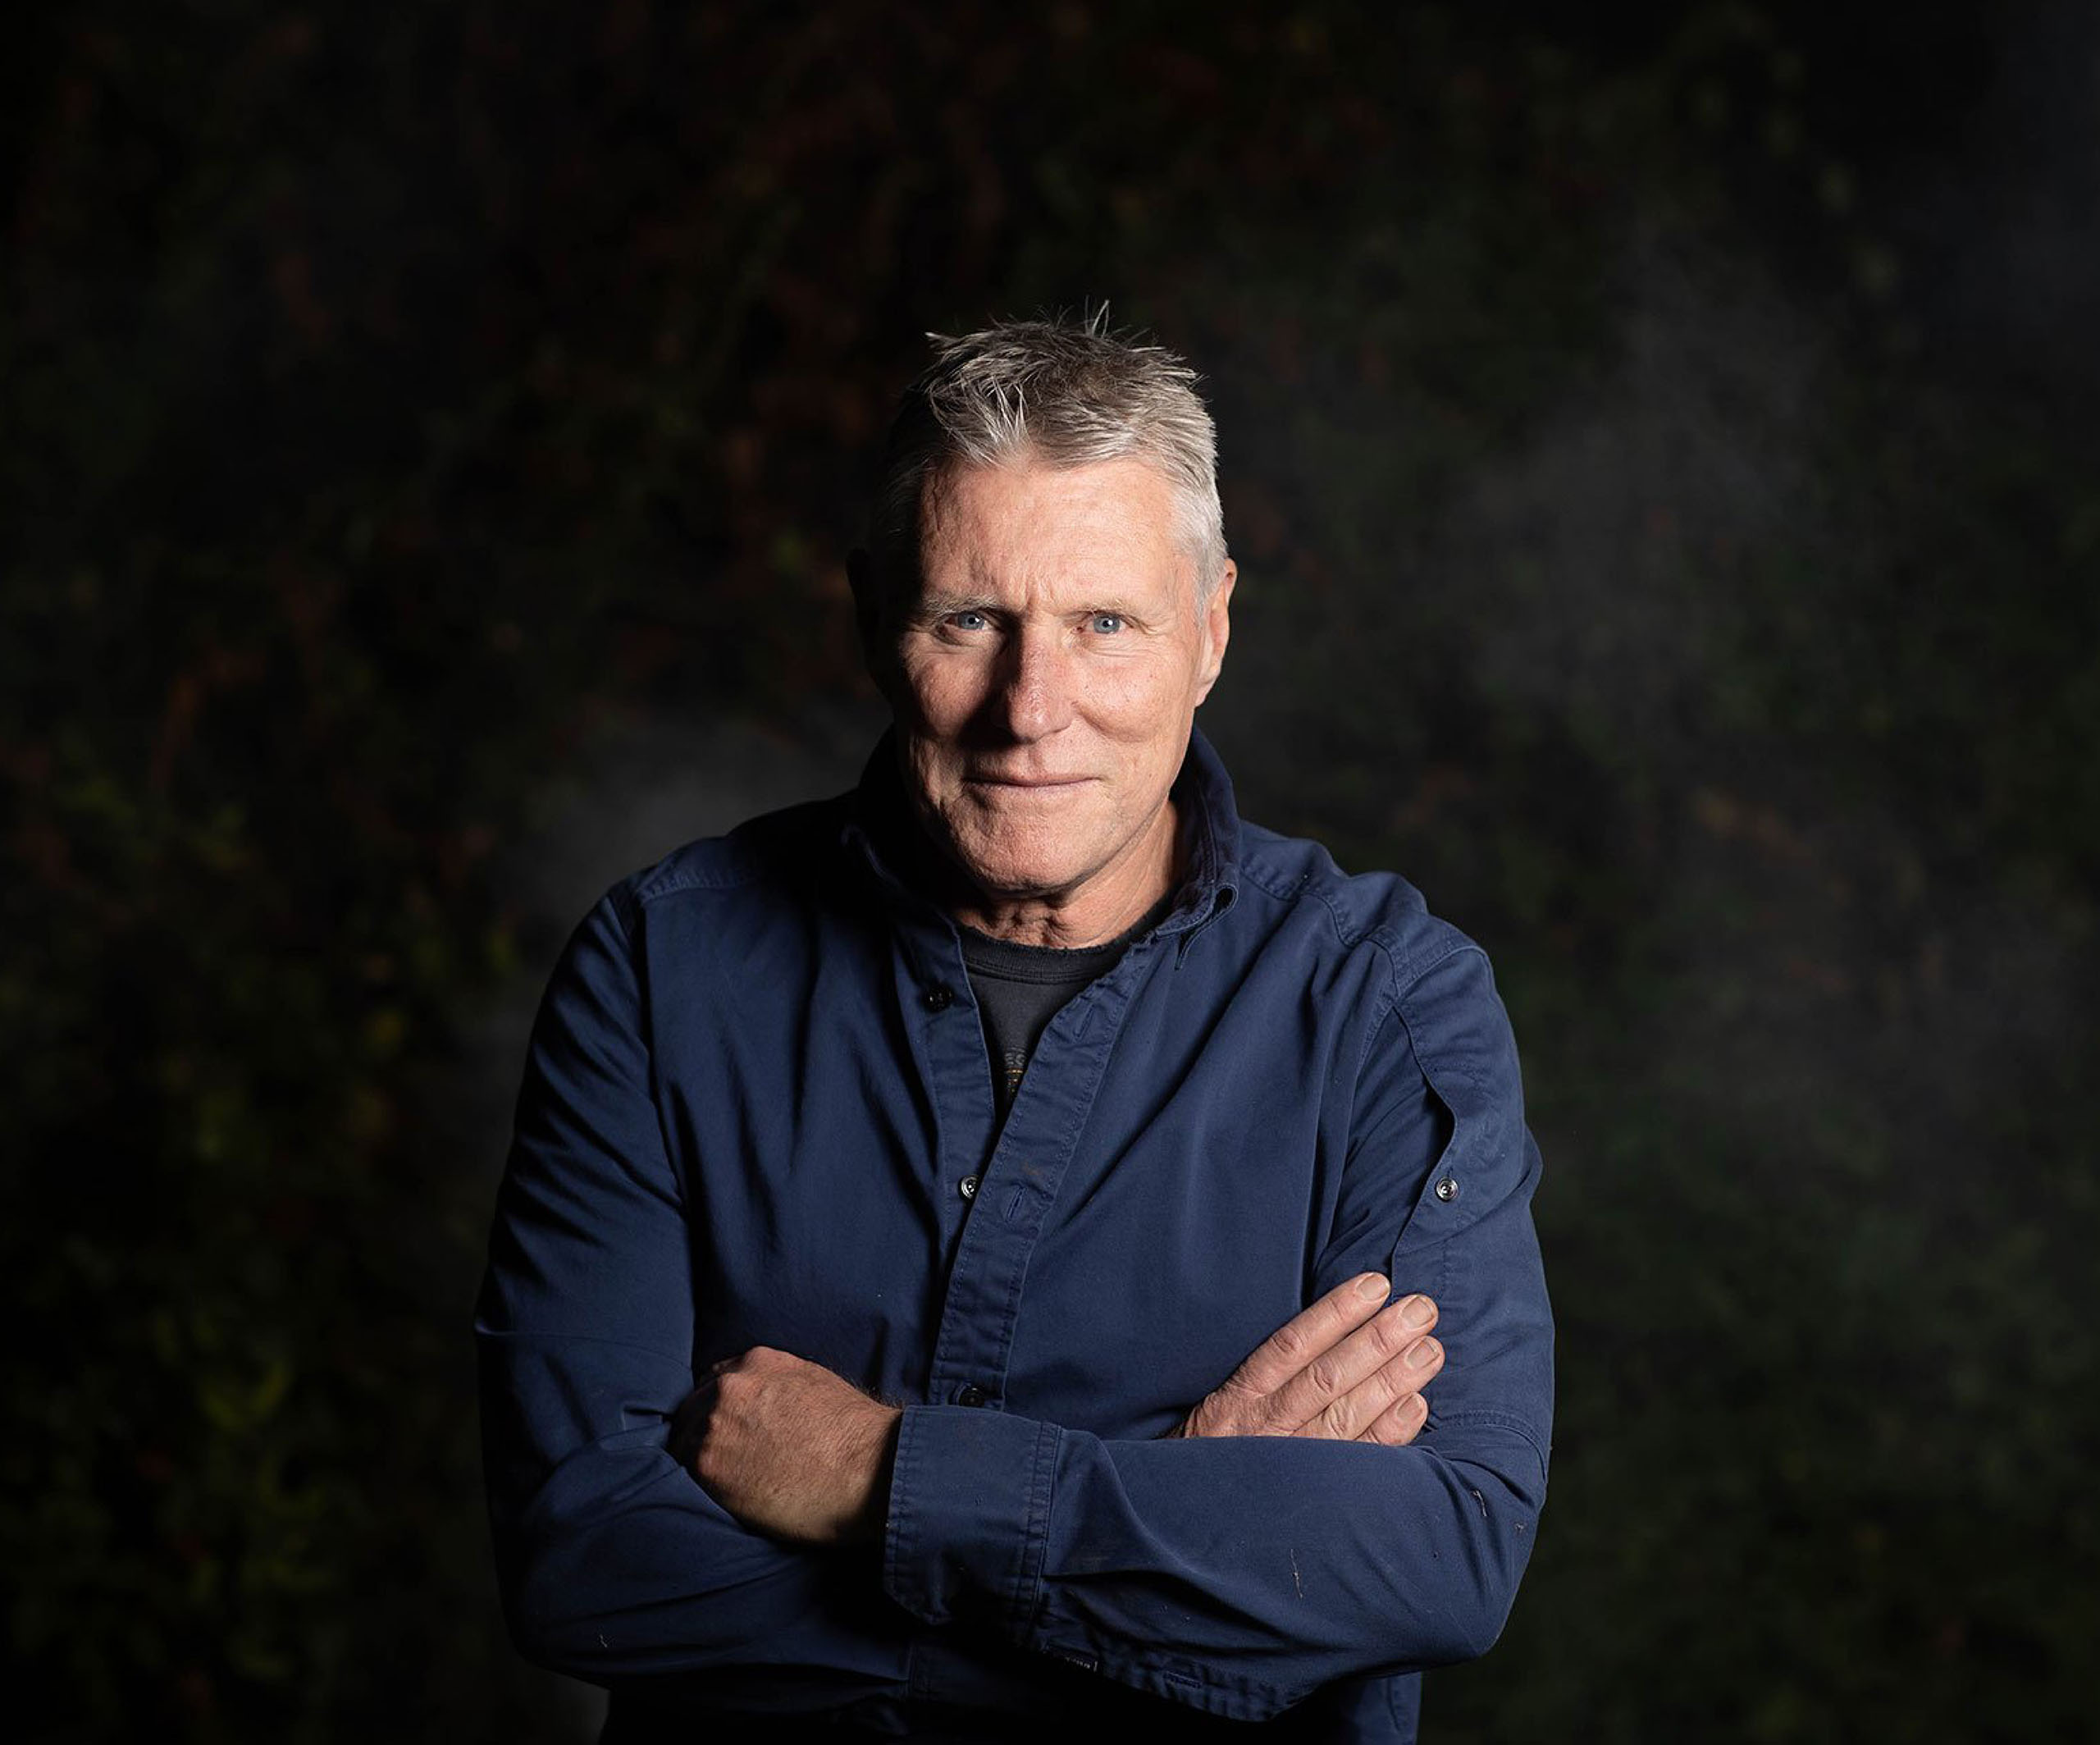 Award-winning Australian journalist and author, Michael Brissenden joins author of Tipping Point, Dinuka McKenzie, to discuss his incendiary thriller. Book now!